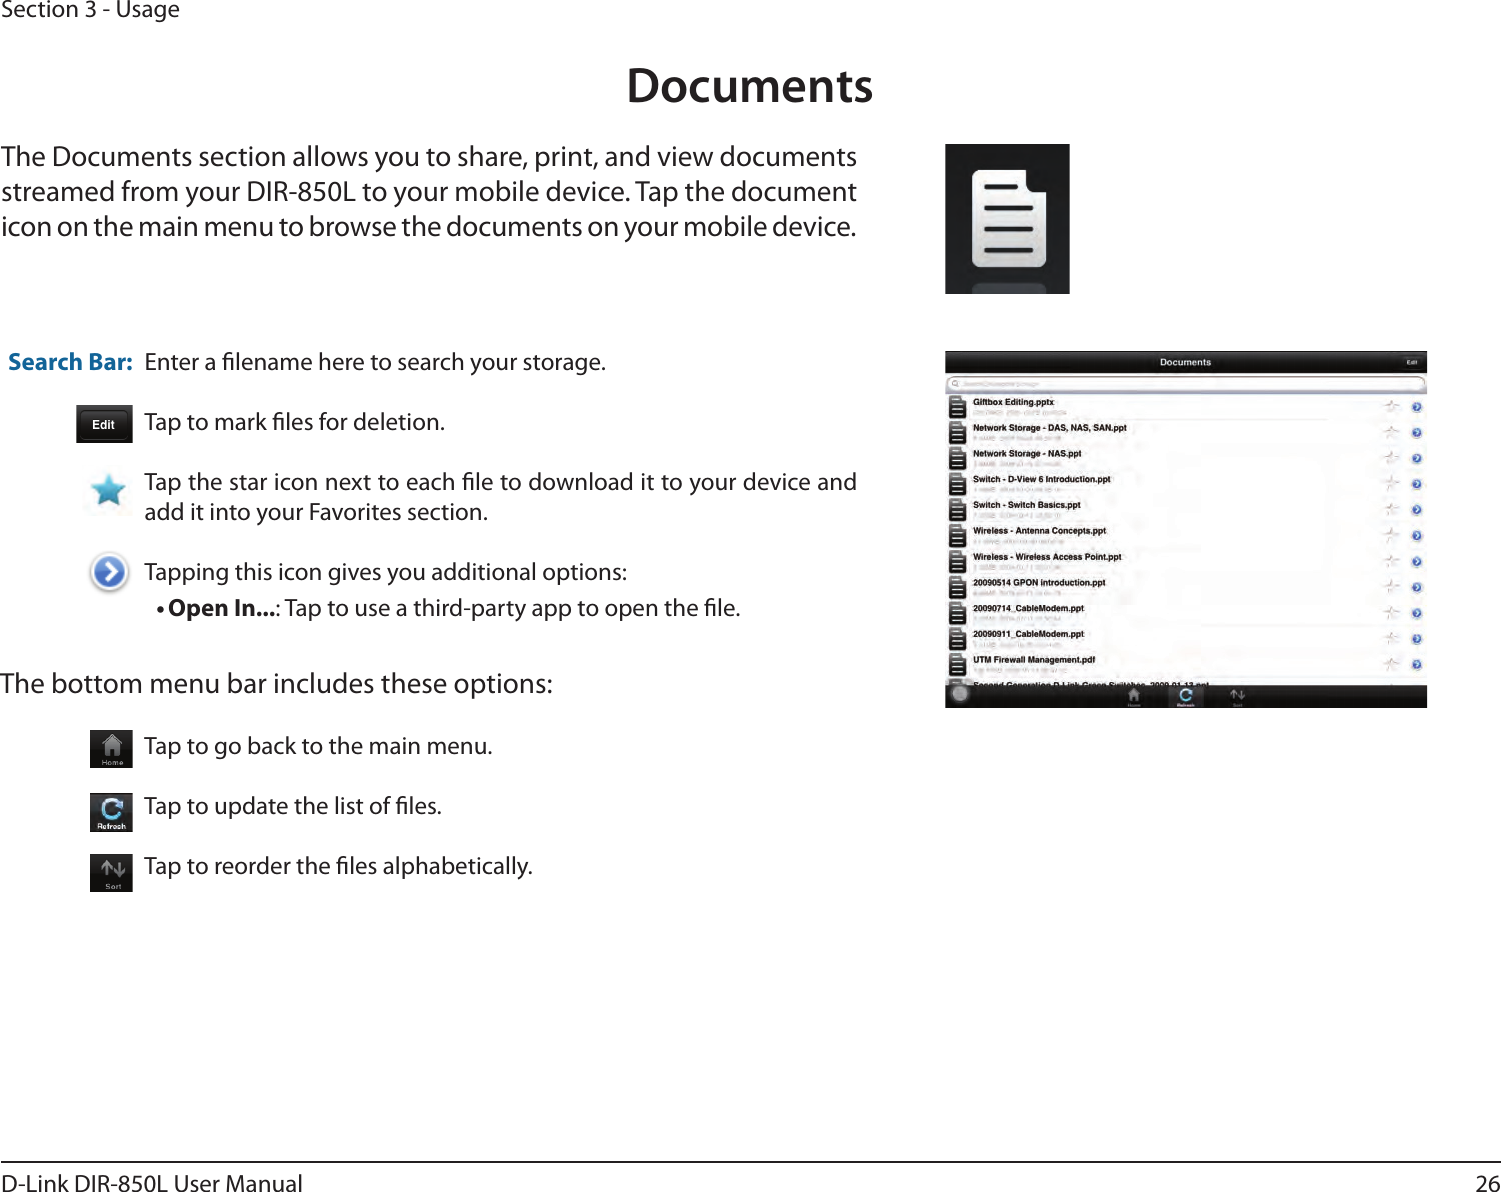 26D-Link DIR-850L User ManualSection 3 - UsageDocumentsThe Documents section allows you to share, print, and view documents streamed from your DIR-850L to your mobile device. Tap the document icon on the main menu to browse the documents on your mobile device.Enter a lename here to search your storage.Tap to mark les for deletion.Tap the star icon next to each le to download it to your device and add it into your Favorites section.Tapping this icon gives you additional options:•Open In...: Tap to use a third-party app to open the le.The bottom menu bar includes these options:Search Bar: Tap to go back to the main menu.Tap to update the list of les.Tap to reorder the les alphabetically.